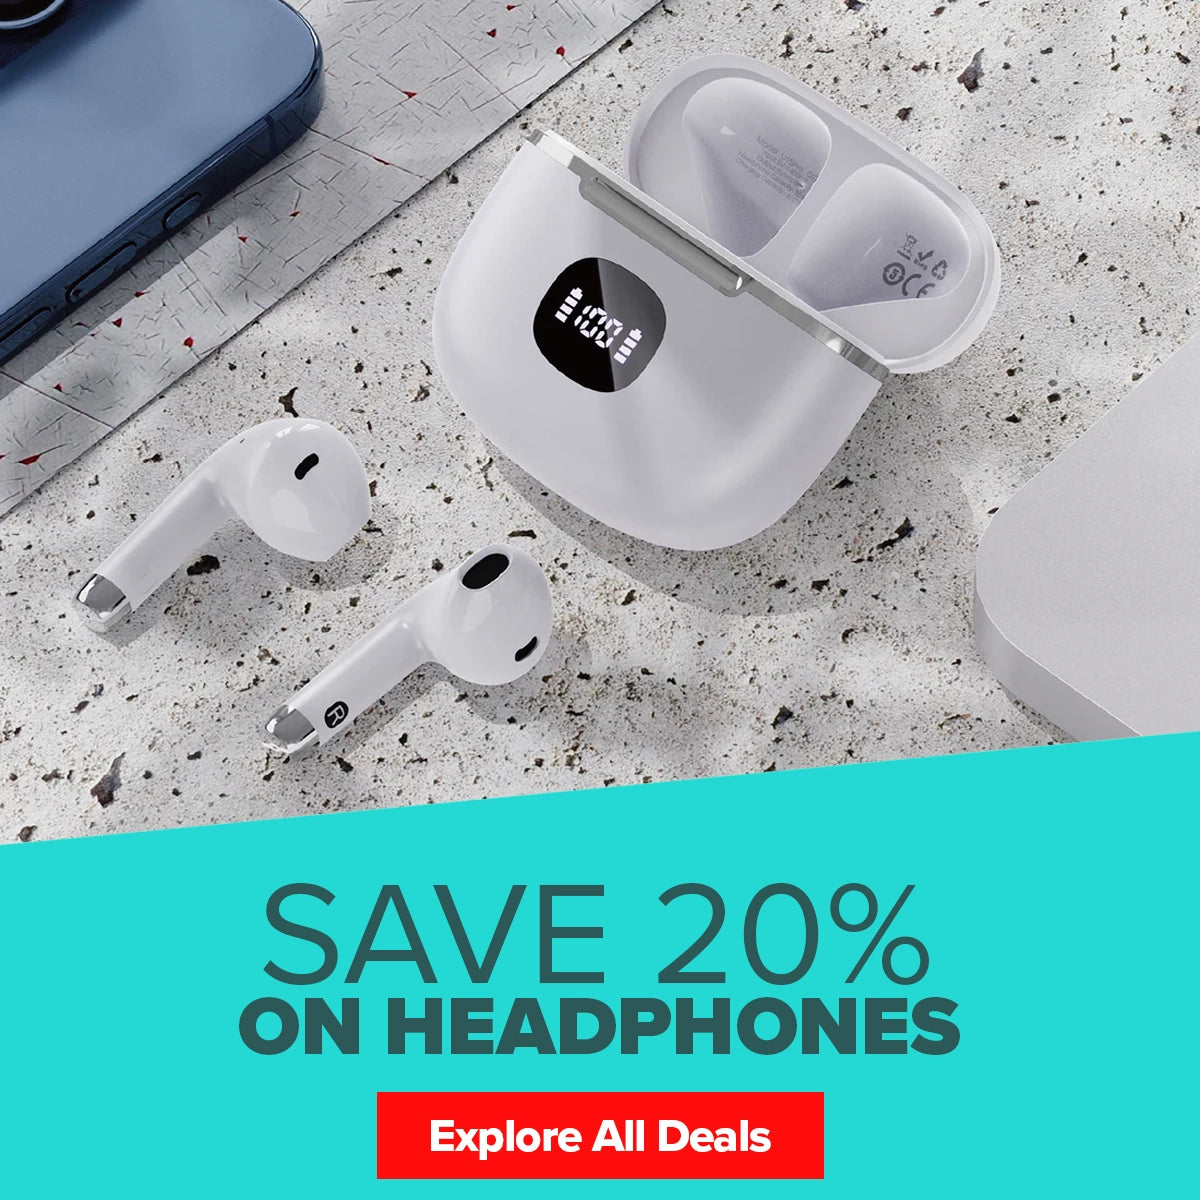 20% off headphones this Father's Day at Maplin